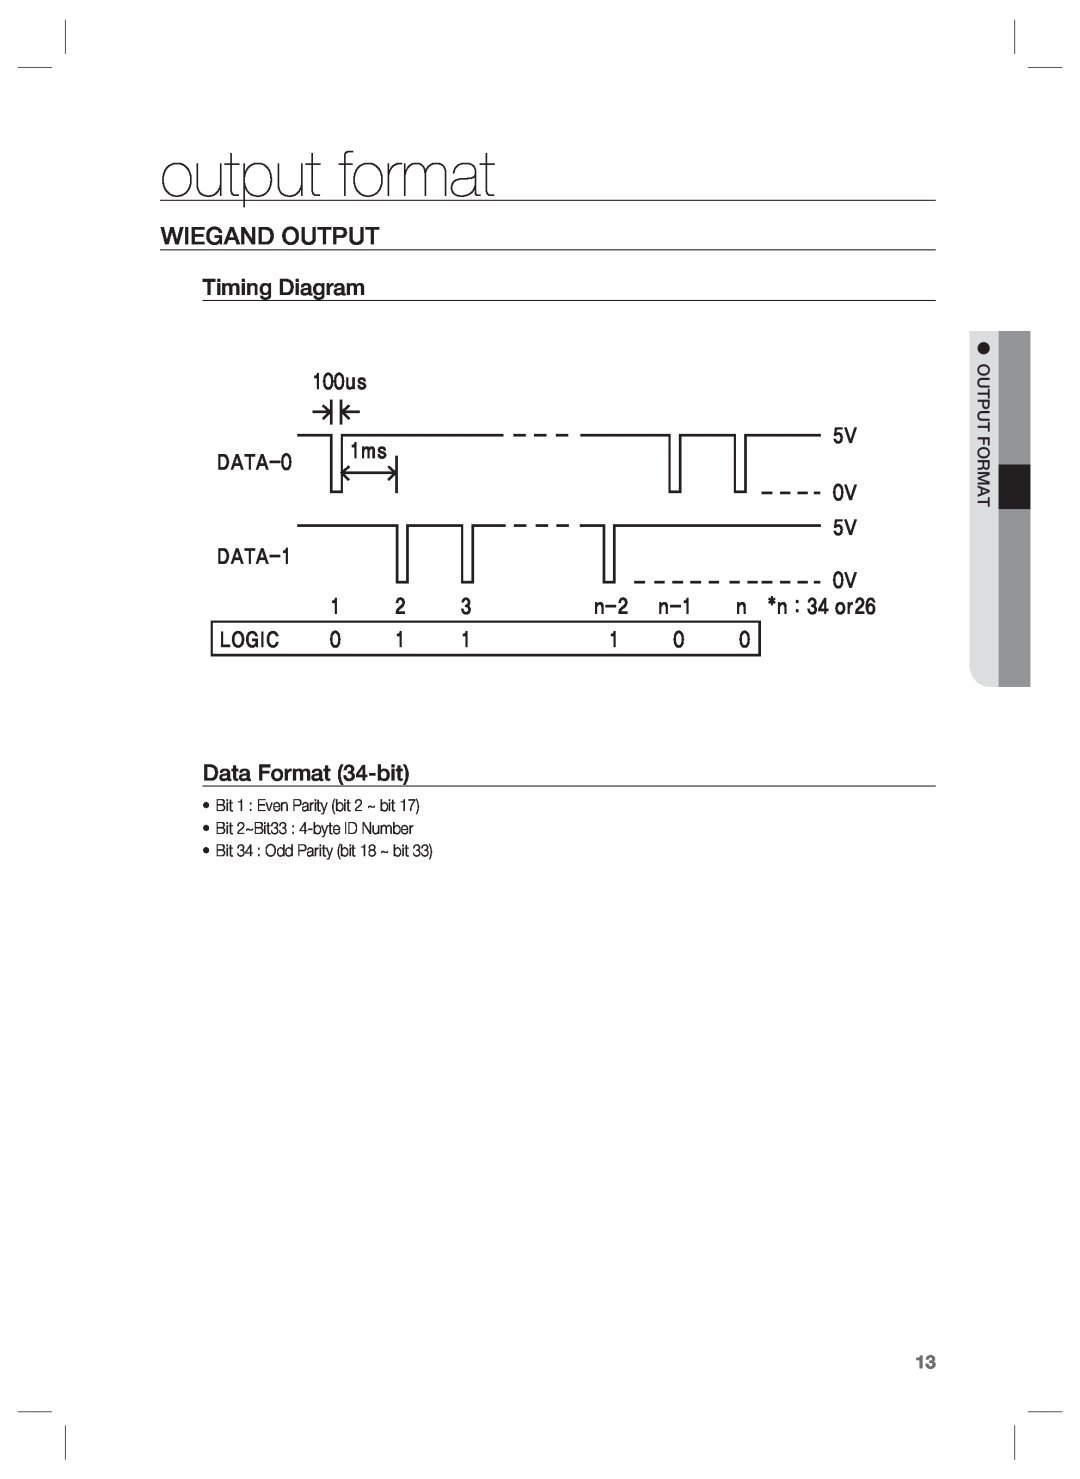 Samsung SSA-R2001 user manual output format, Wiegand Output 